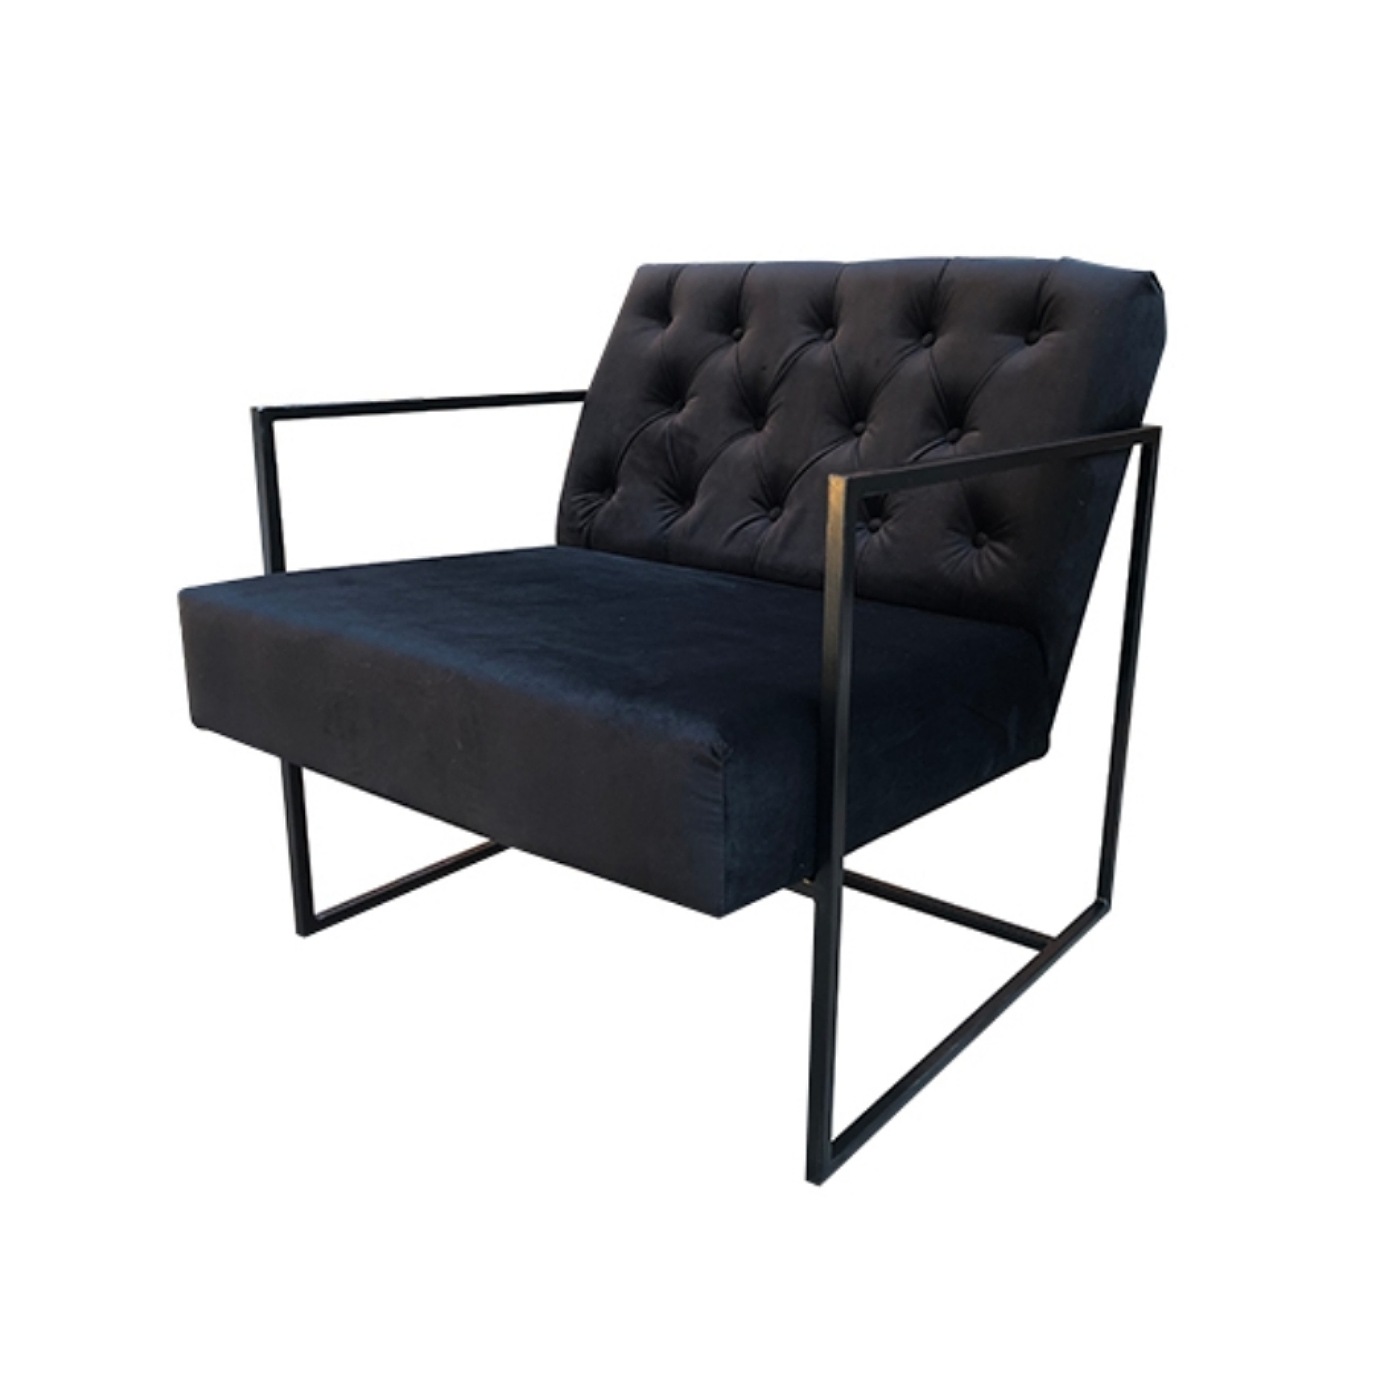 Single Seat Couch With A Steel Frame And Black Suede Cushions.